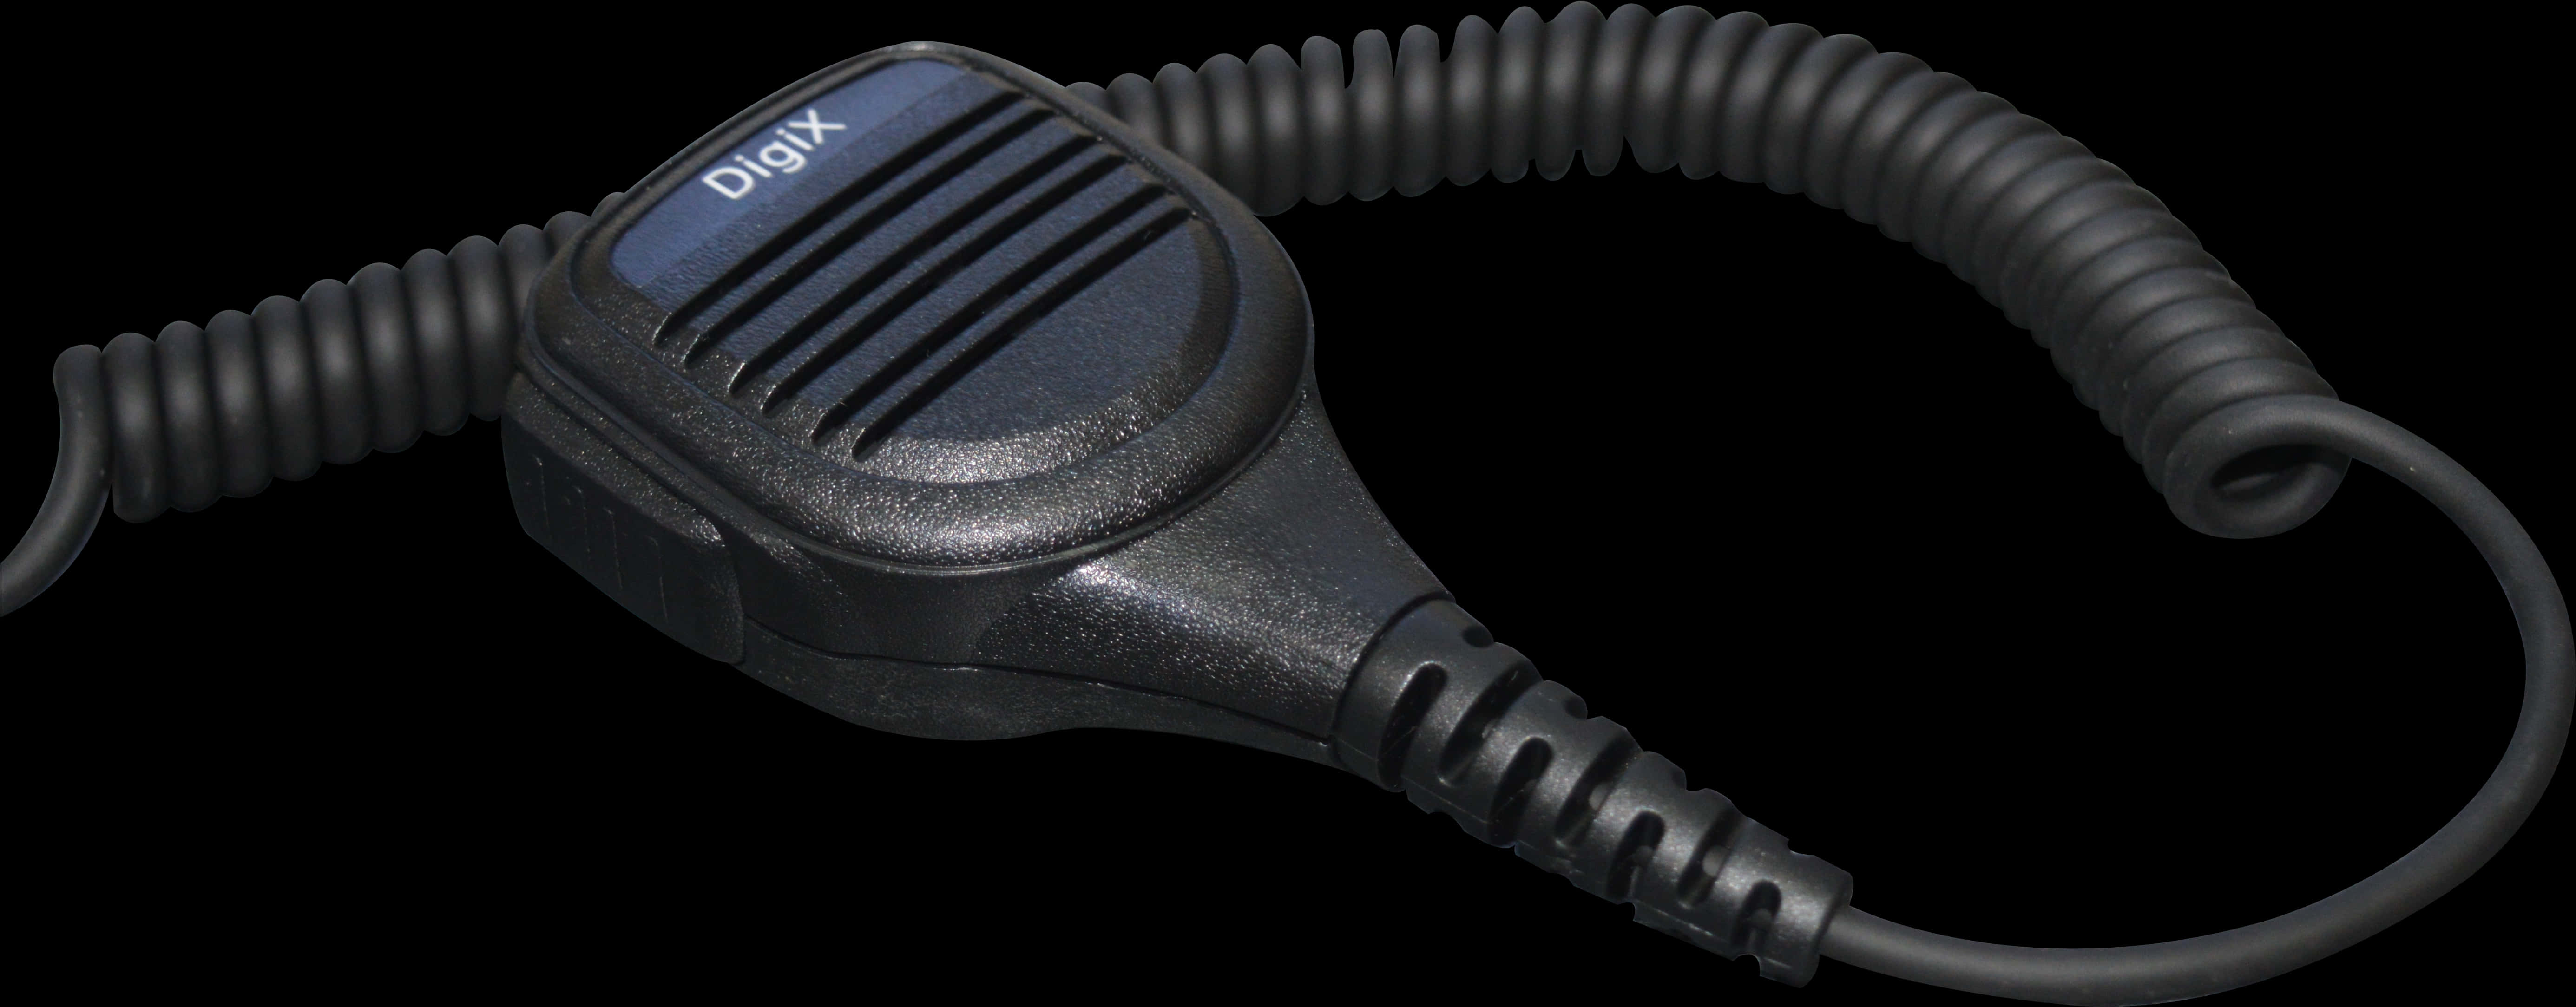 Black Handheld Microphone Cable